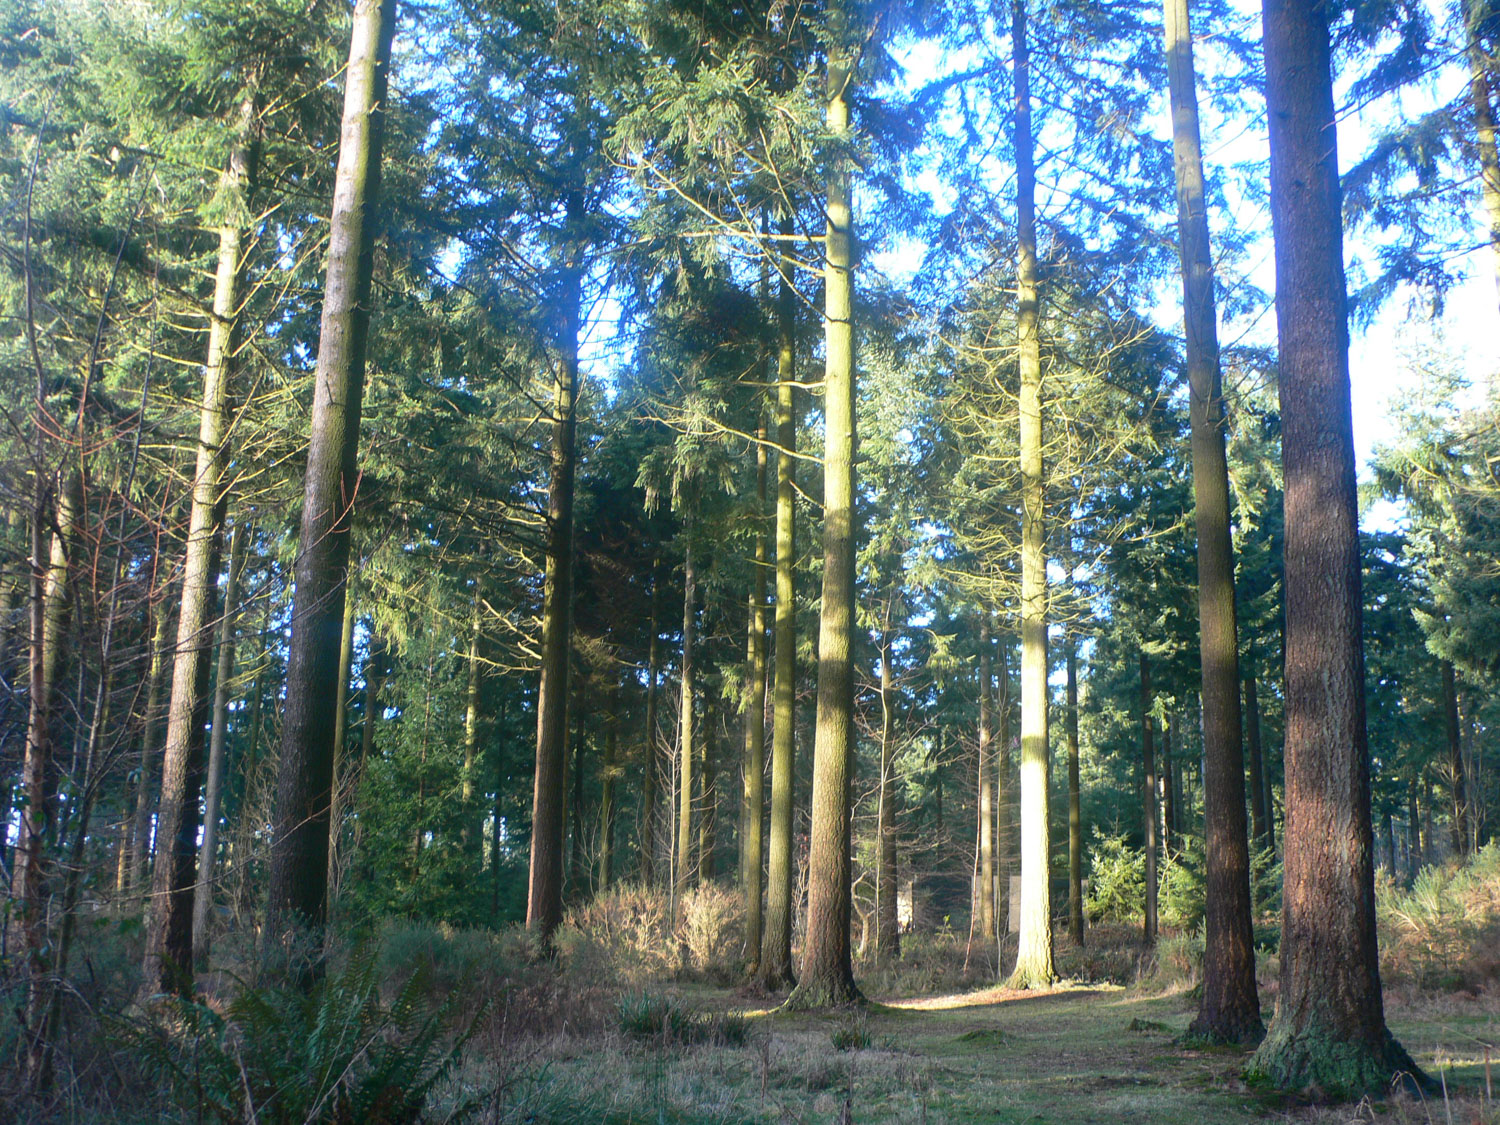 The Forest at Centerparcs Longleat